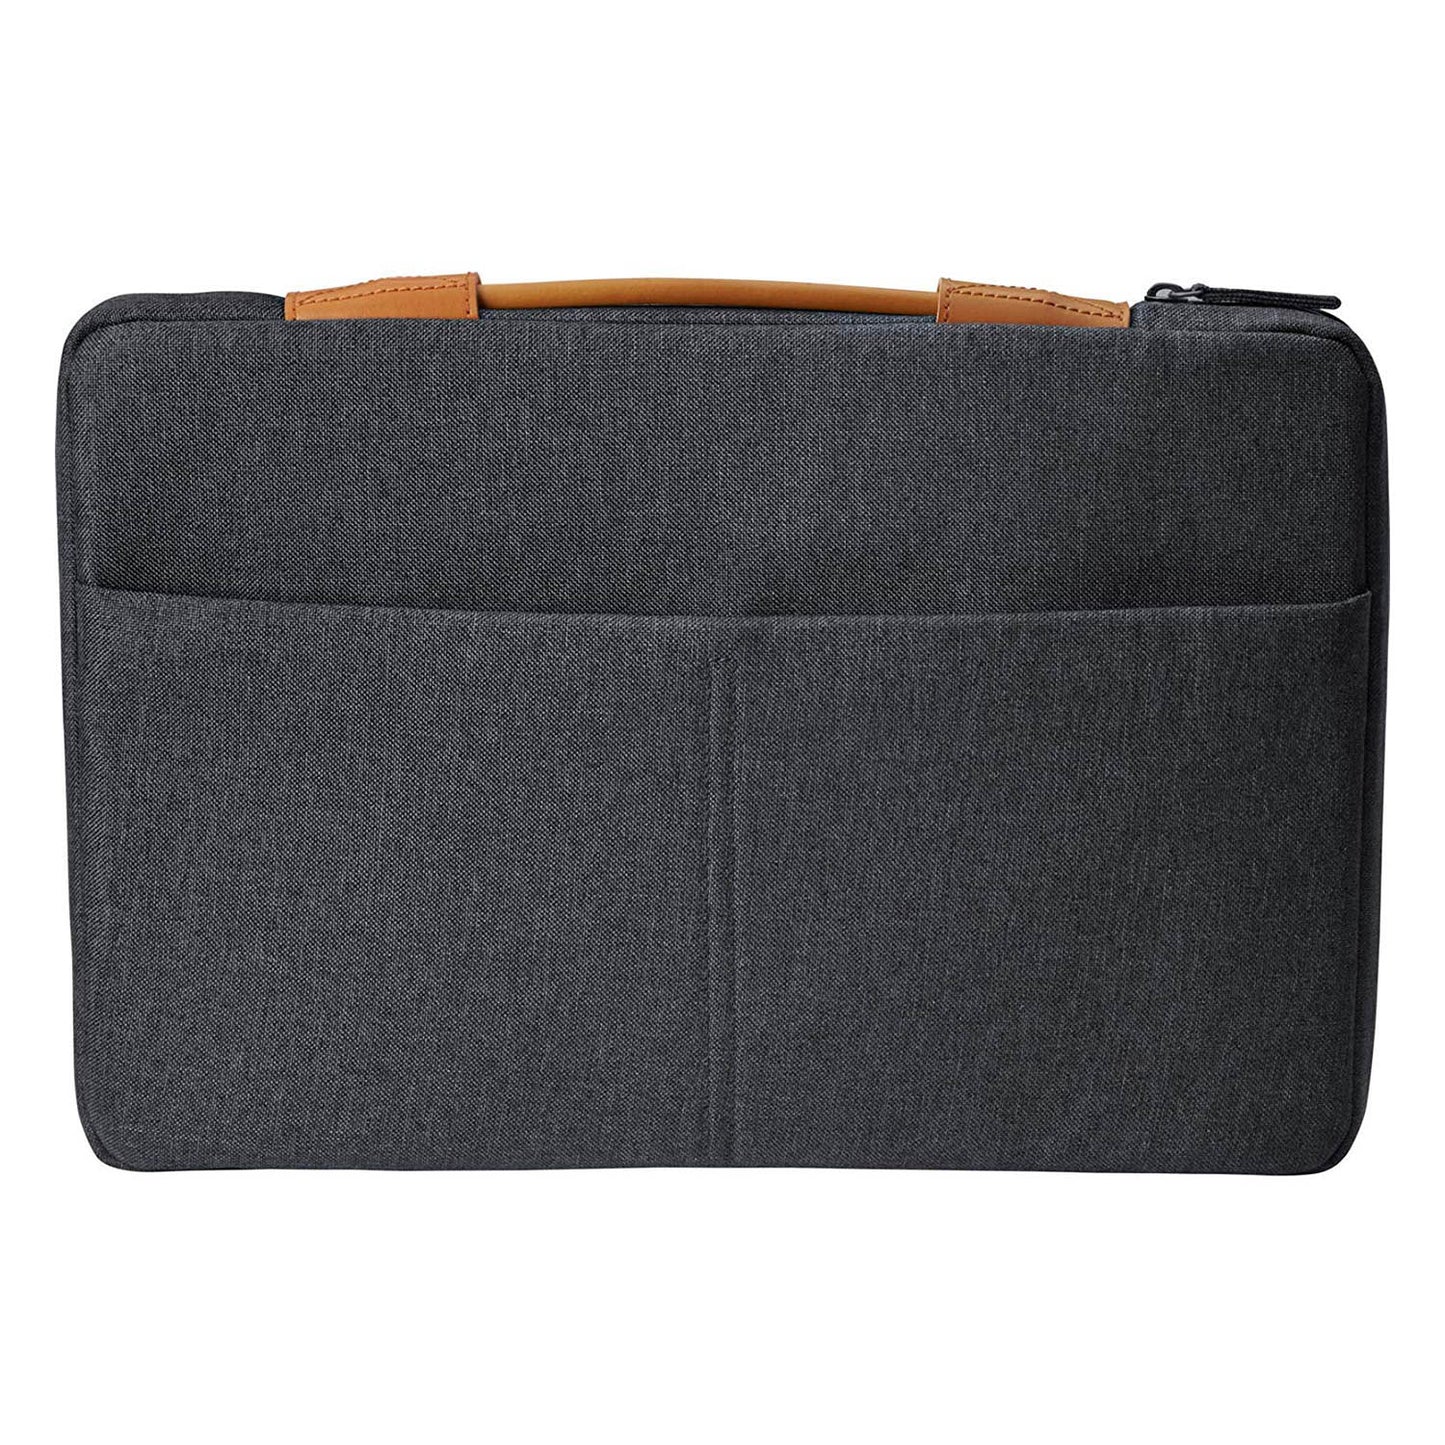 HP Envy Urban 14 Inch Sleeve with RFID Blocking Pocket for Notebooks